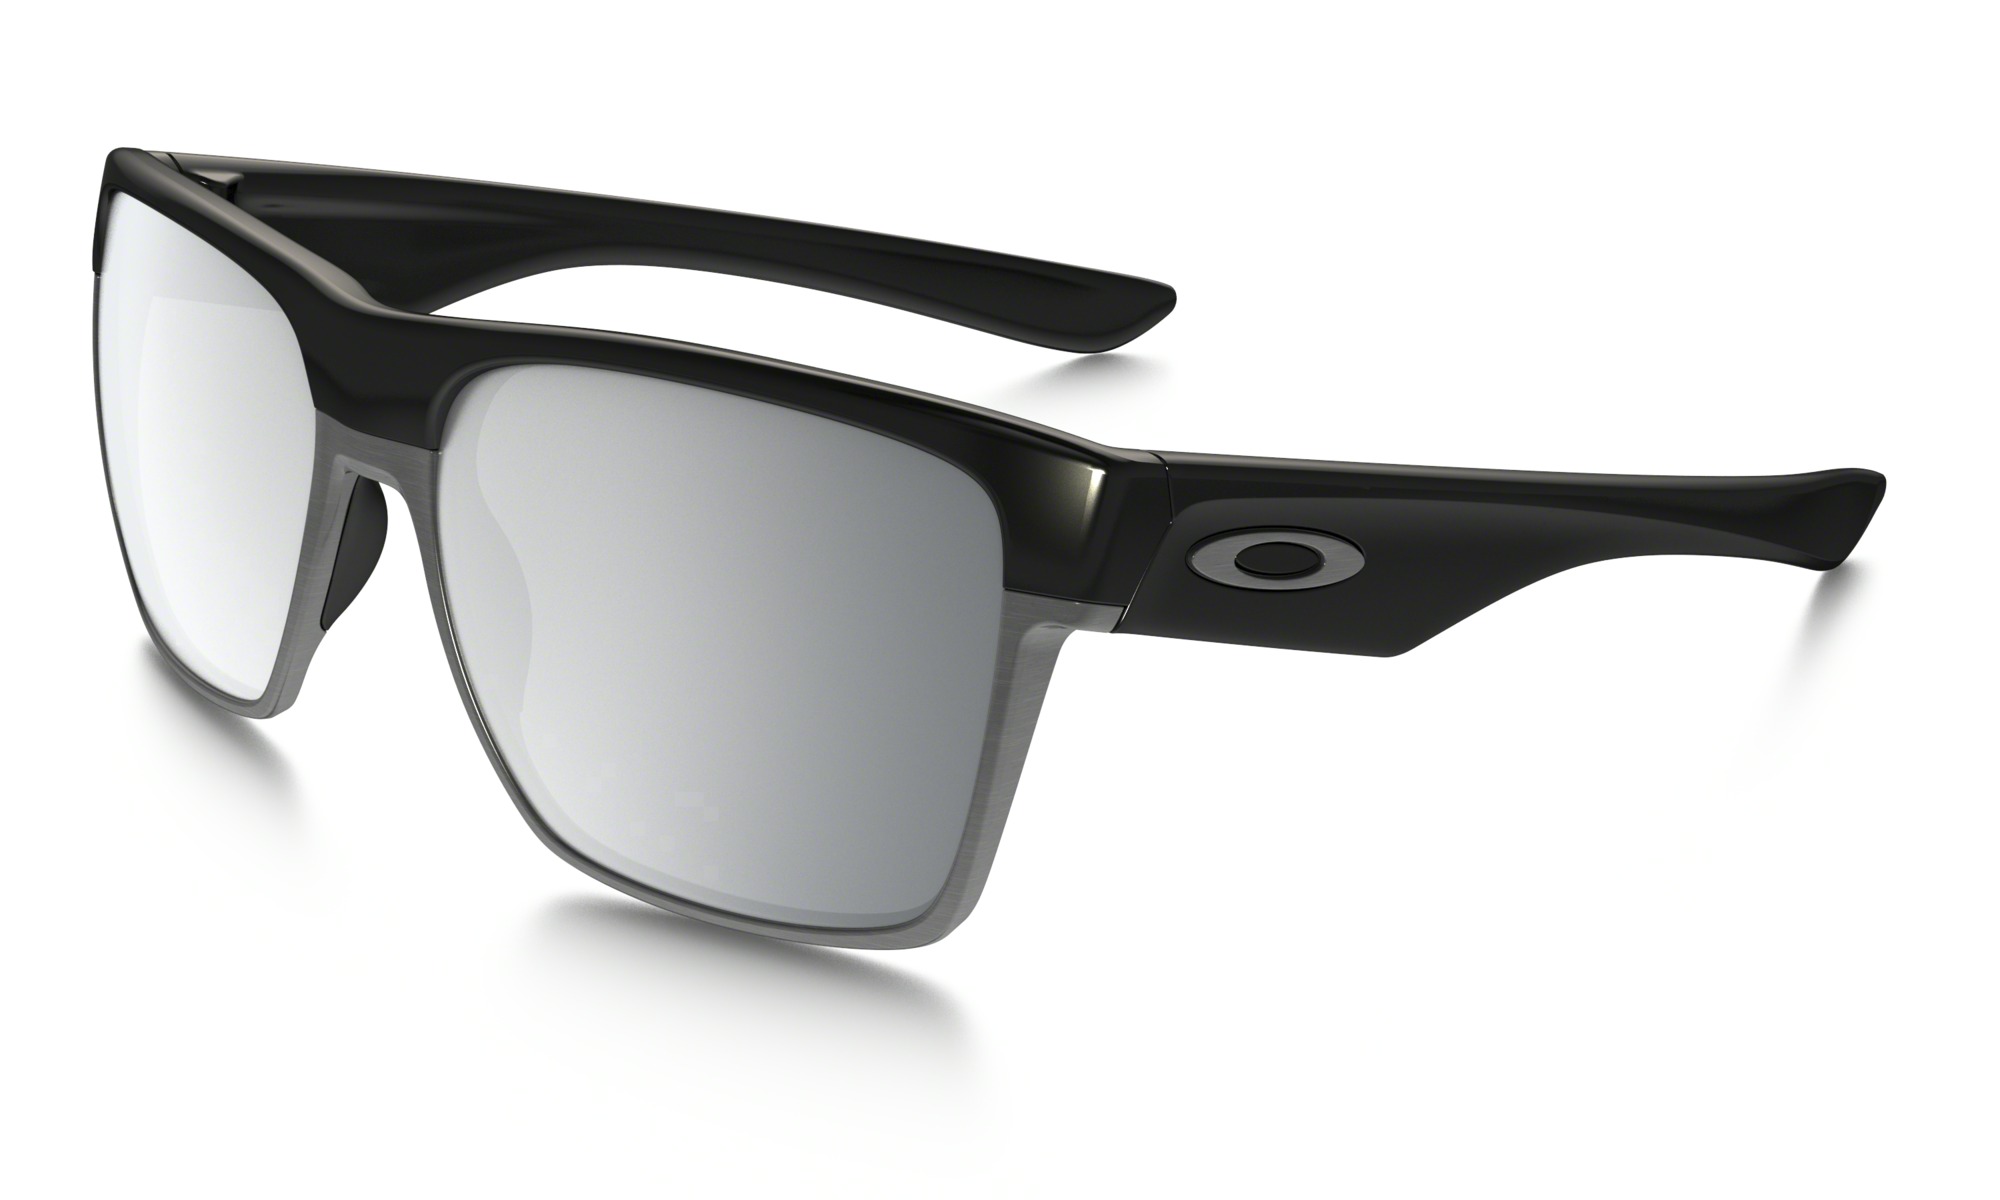 The Newest Oakley Sunglasses of 2016 Hit the Market | SportRx